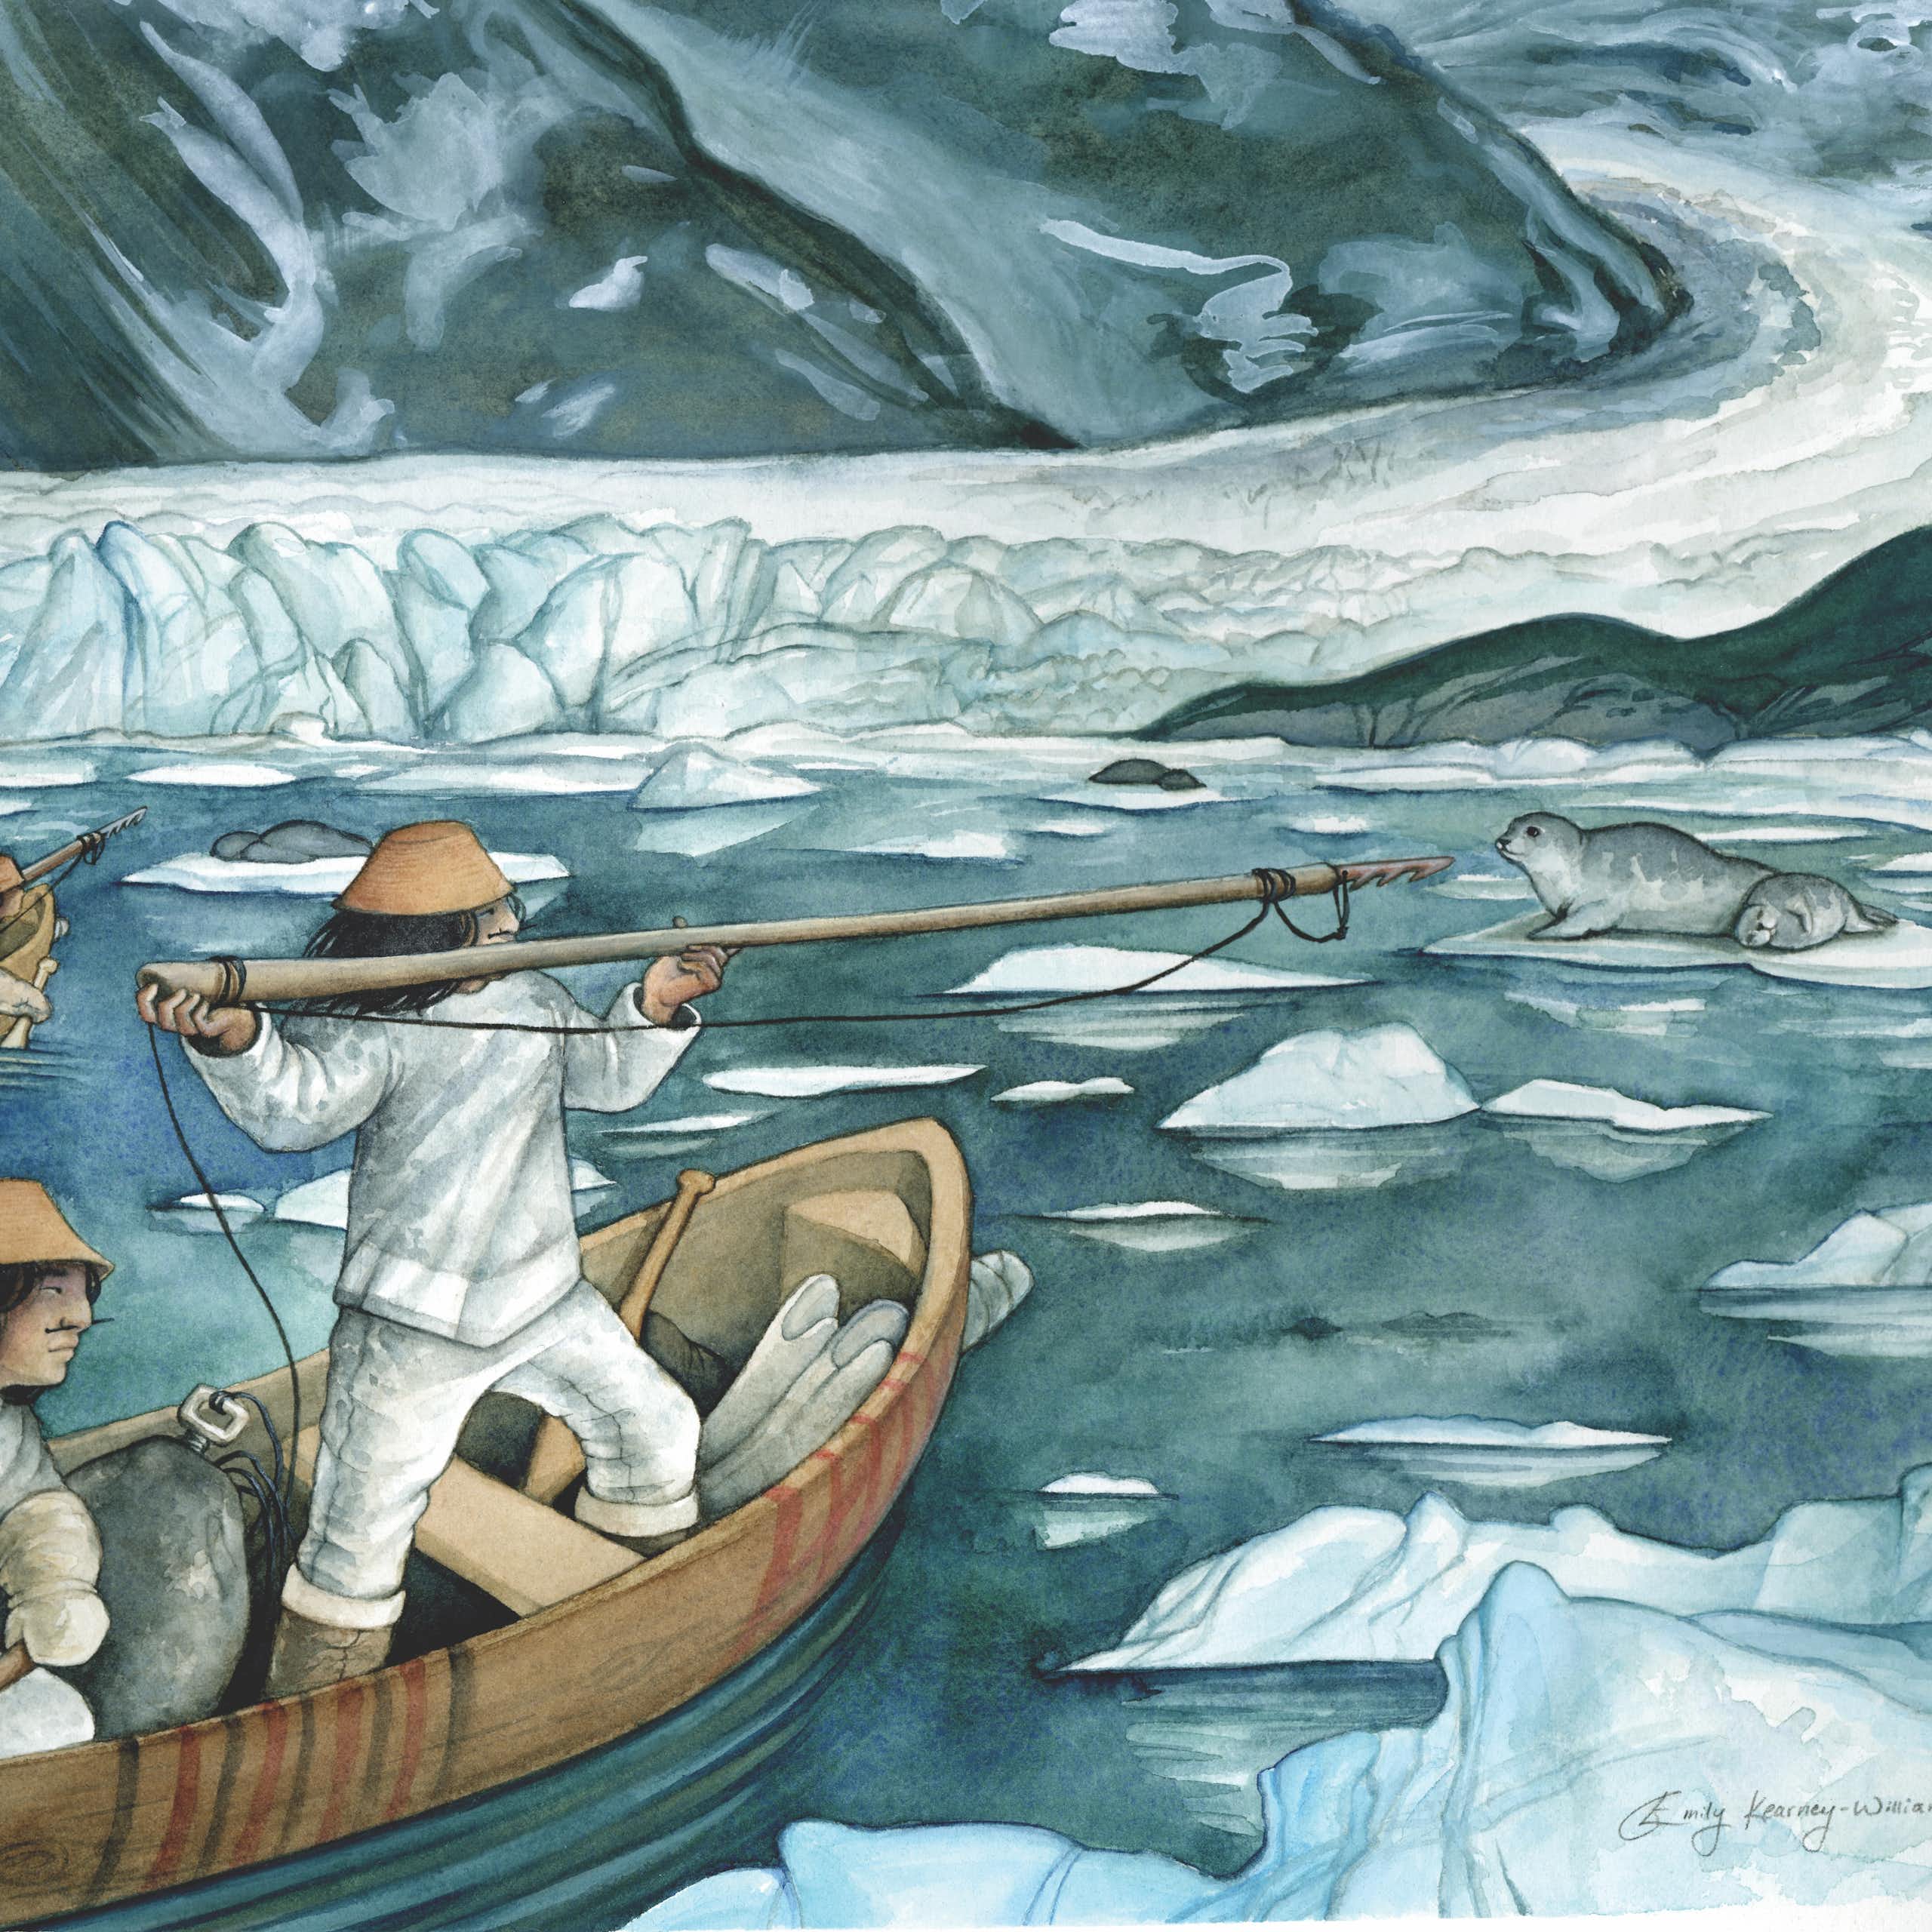 painting of two hunting canoes with two people in each, floating in icy waters, harpoon aimed at a seal on the ice